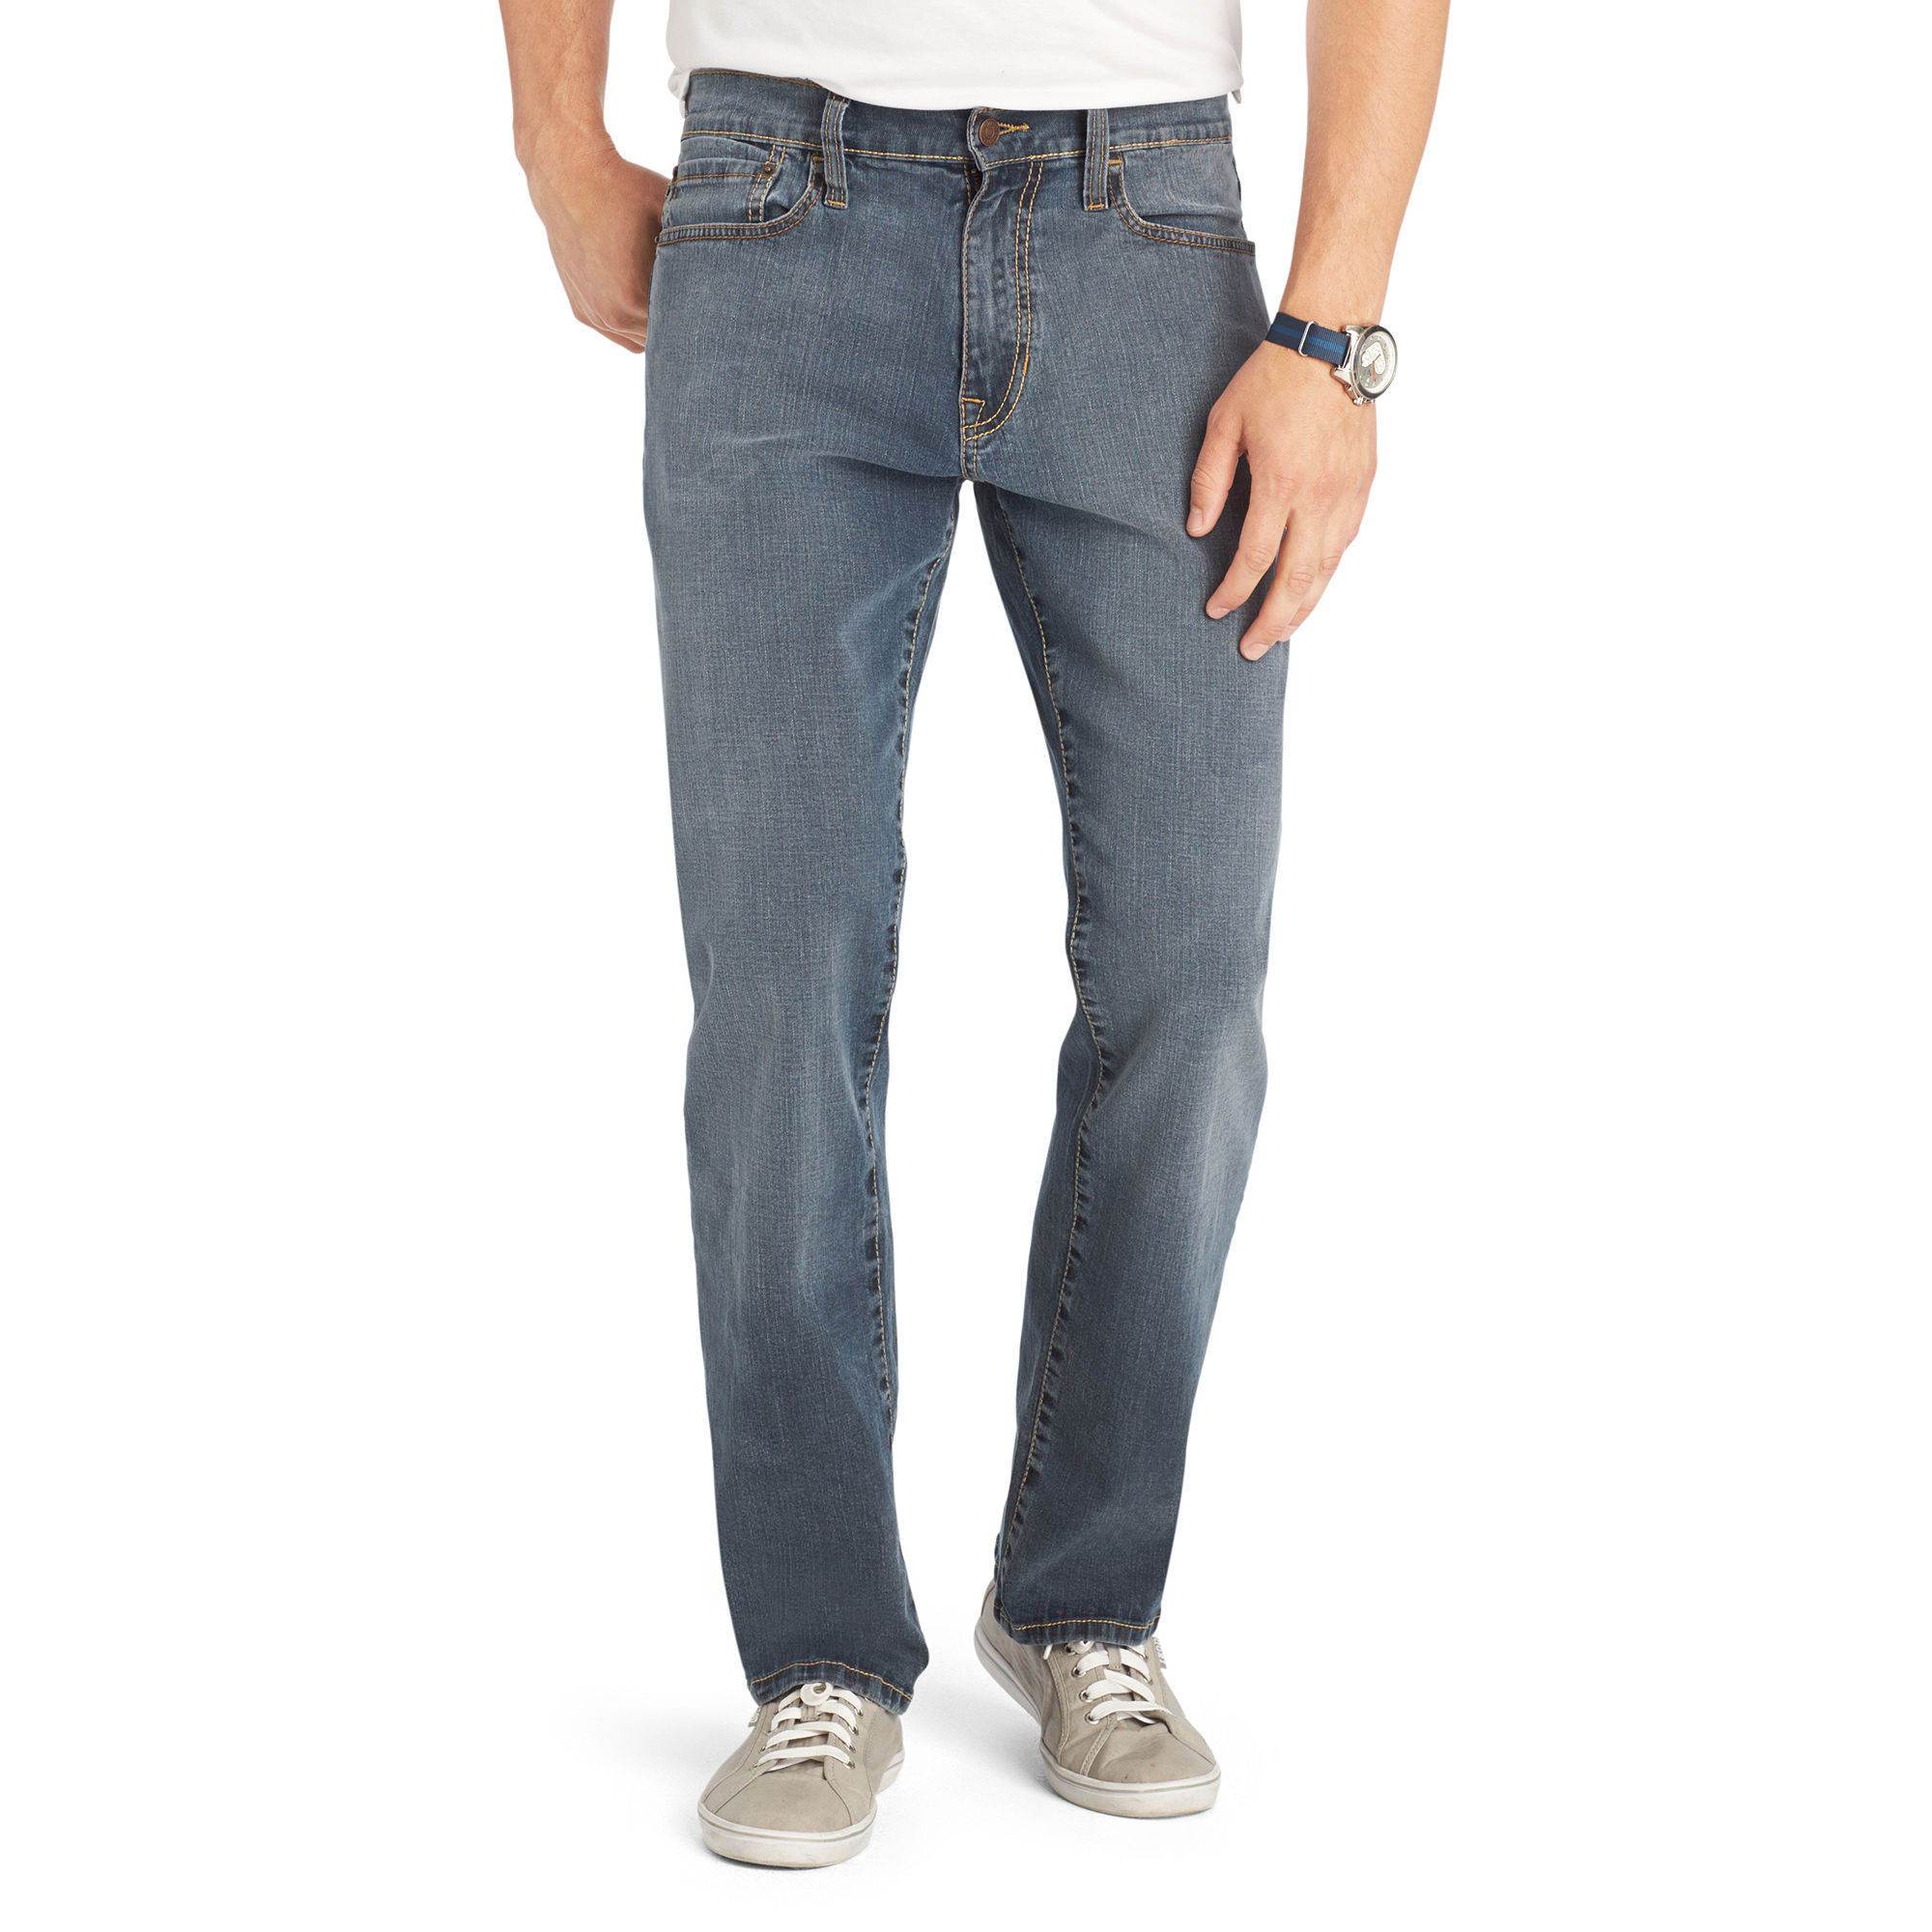 Men's Big and / or Tall Jeans - Men's Jeans in Extended Sizes